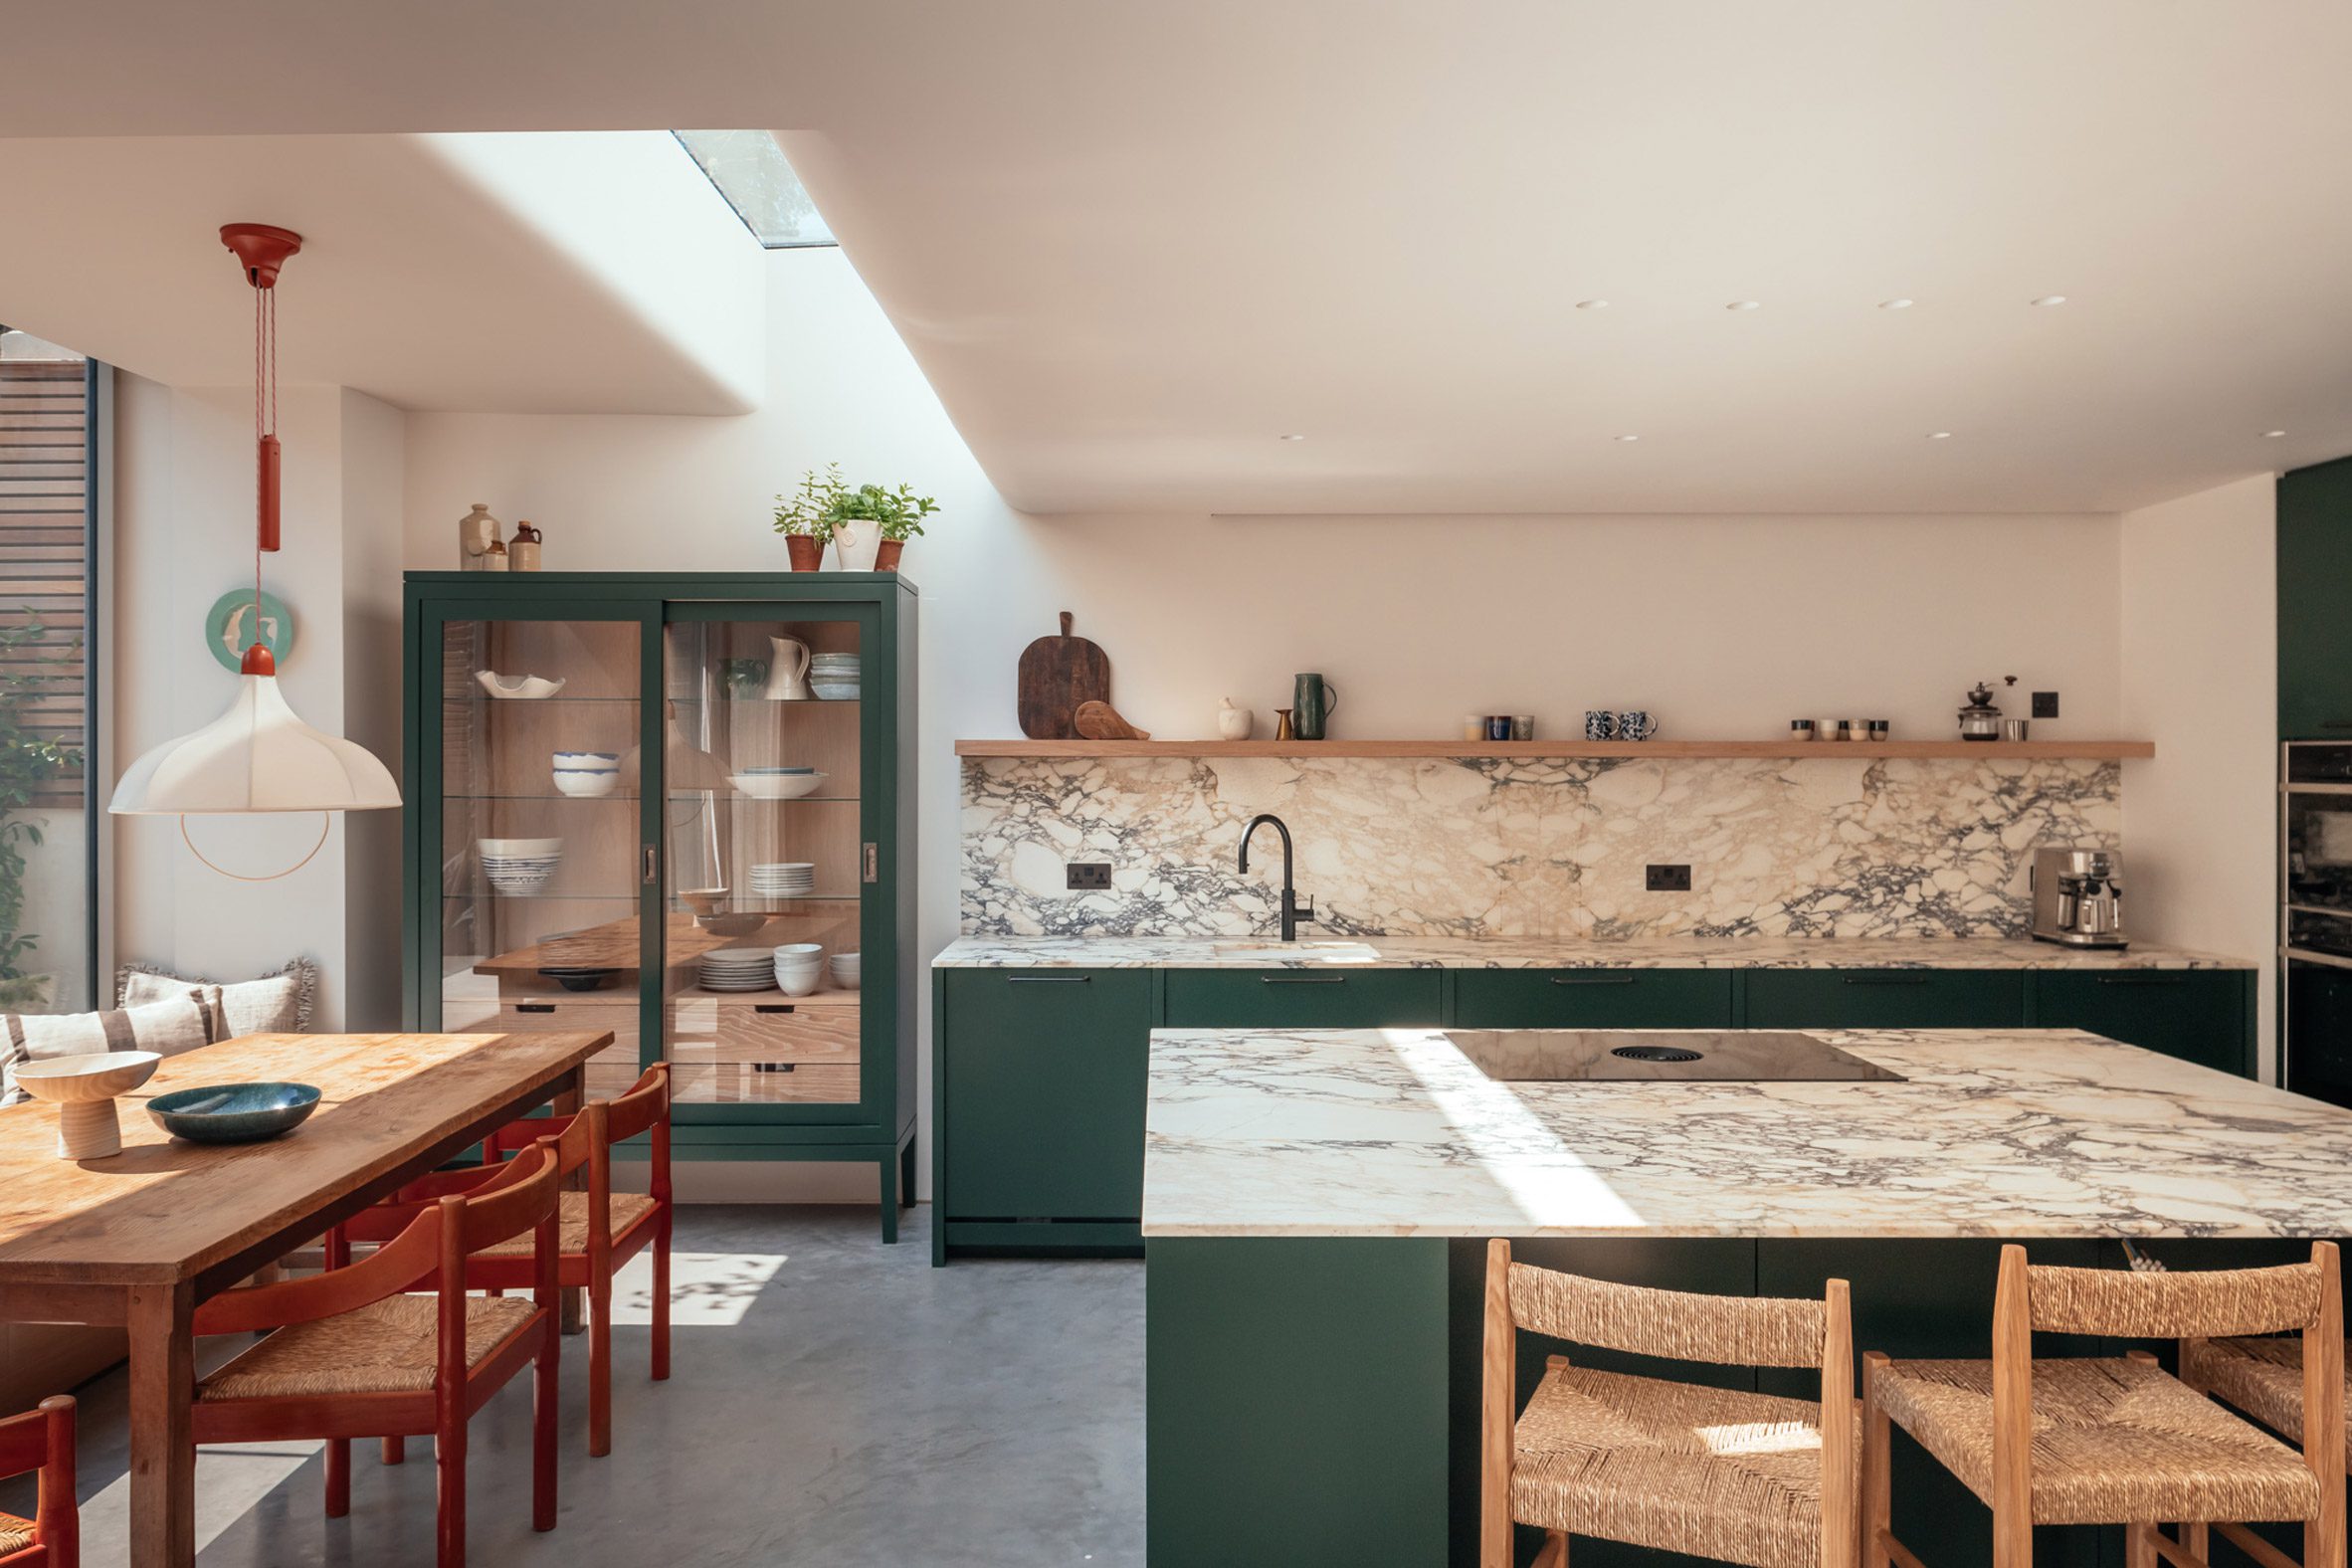 Kitchen interior of London home by Oliver Leech Architects